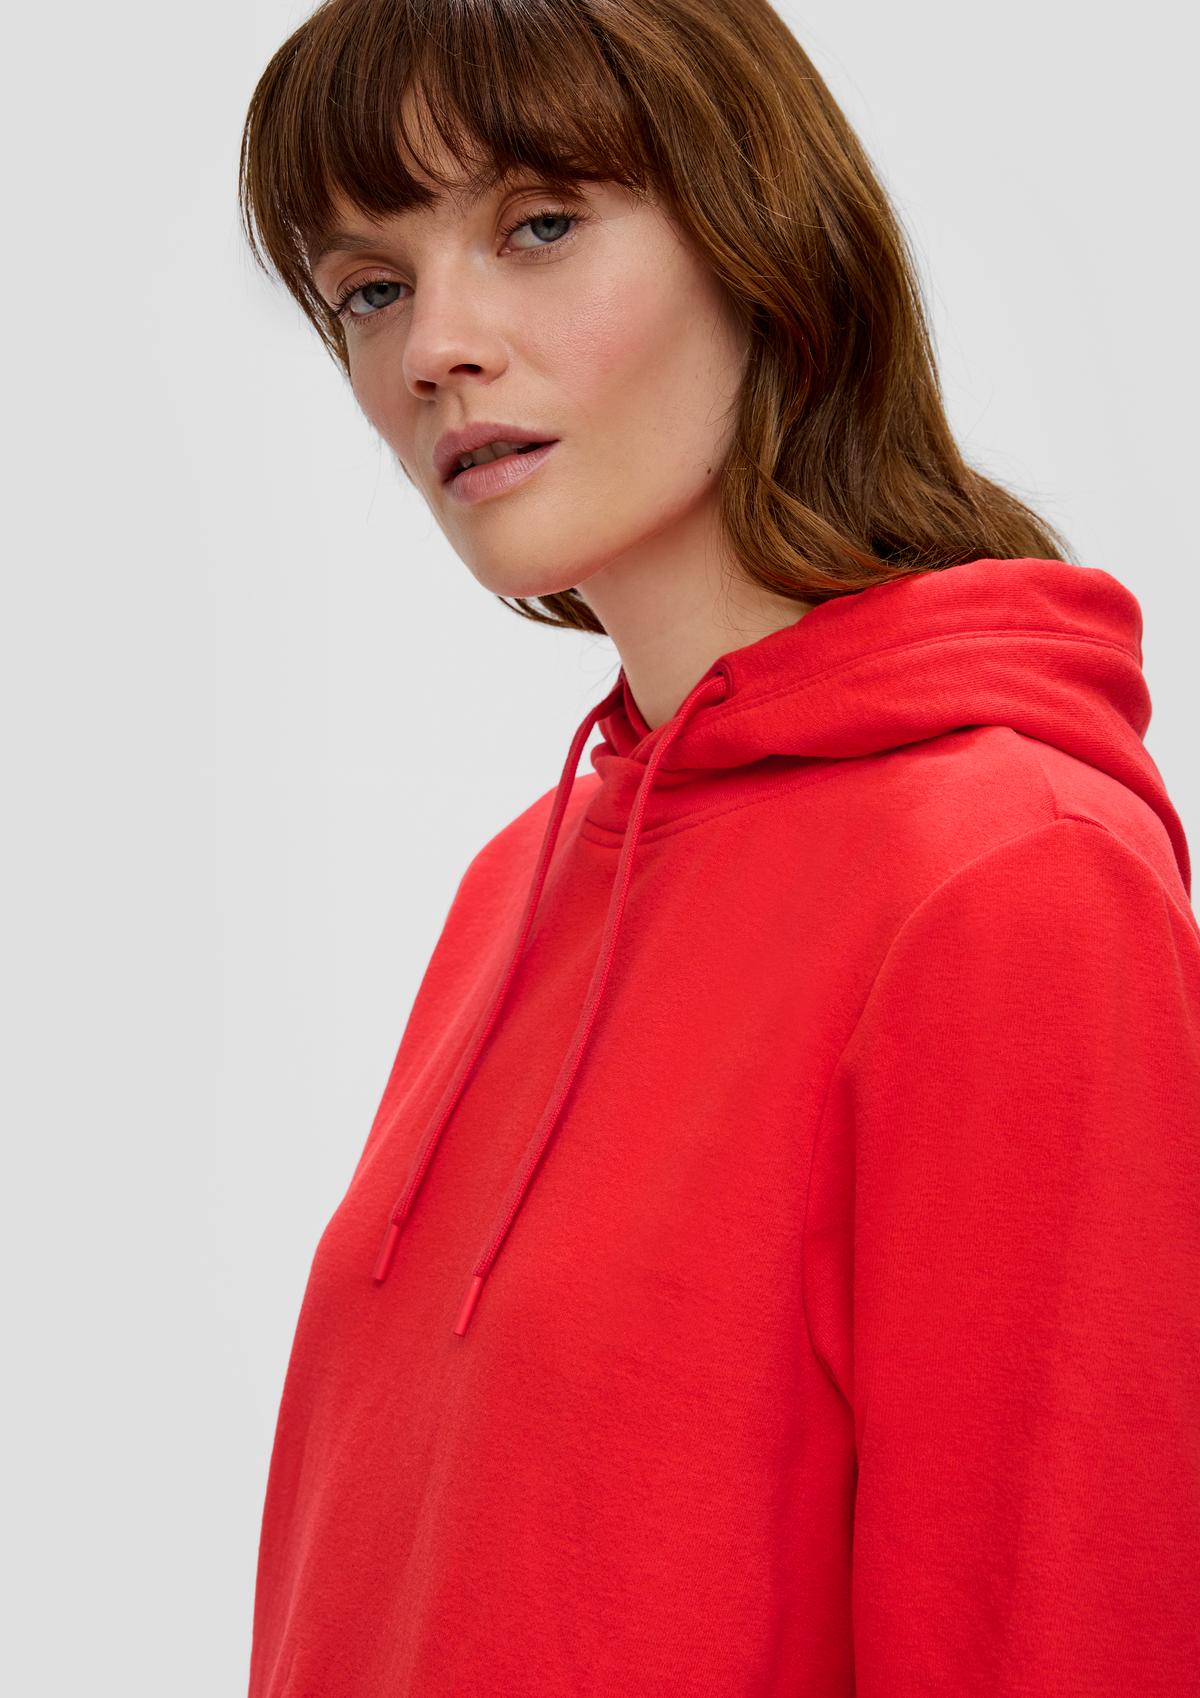 s.Oliver Hooded sweatshirt in a cotton blend